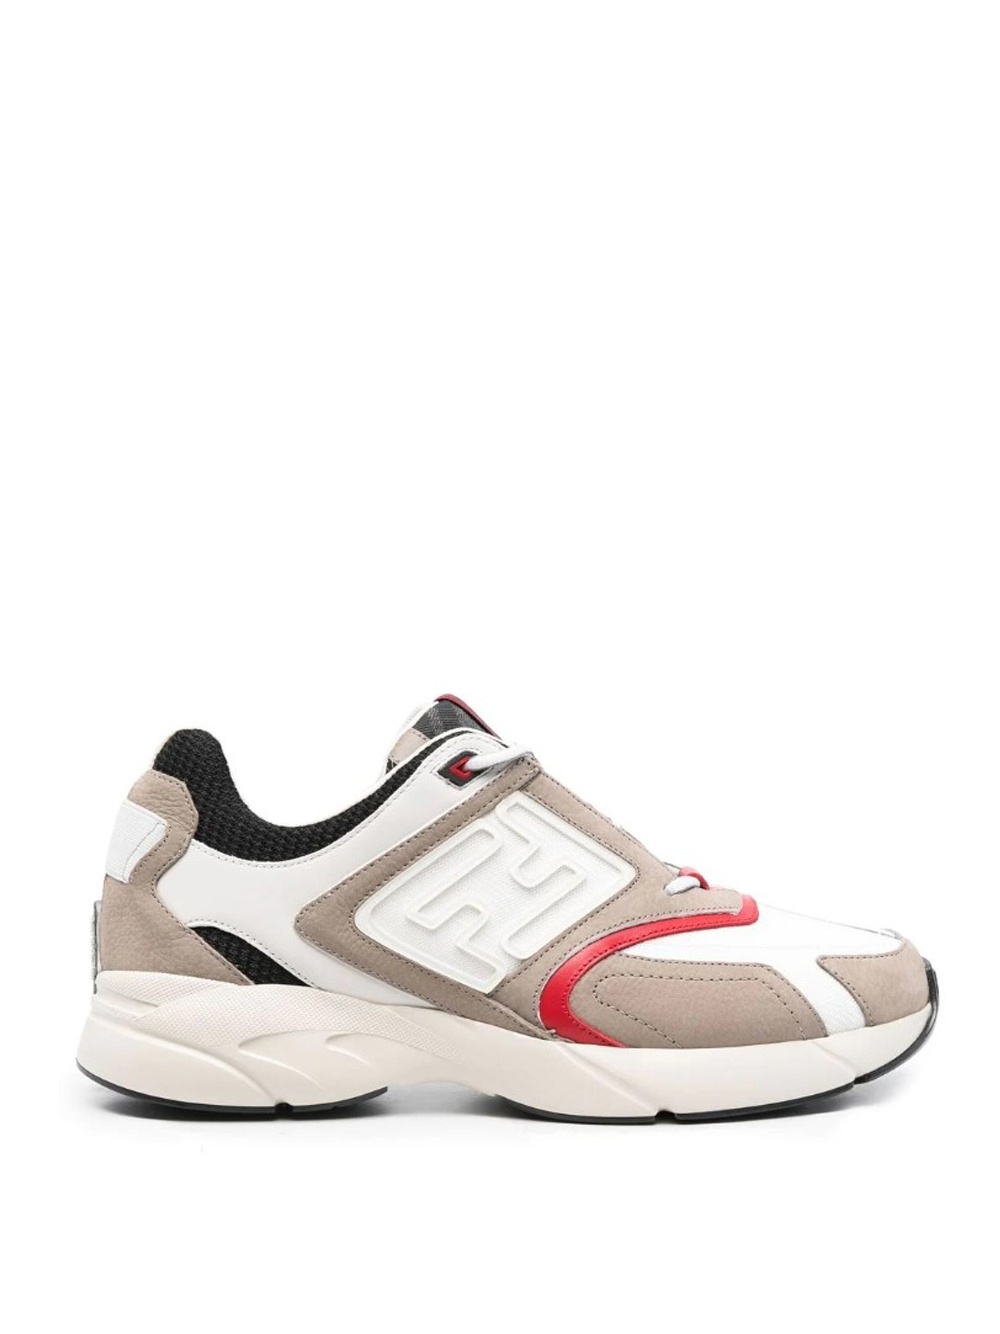 FENDI - Trainer With Fabric Details